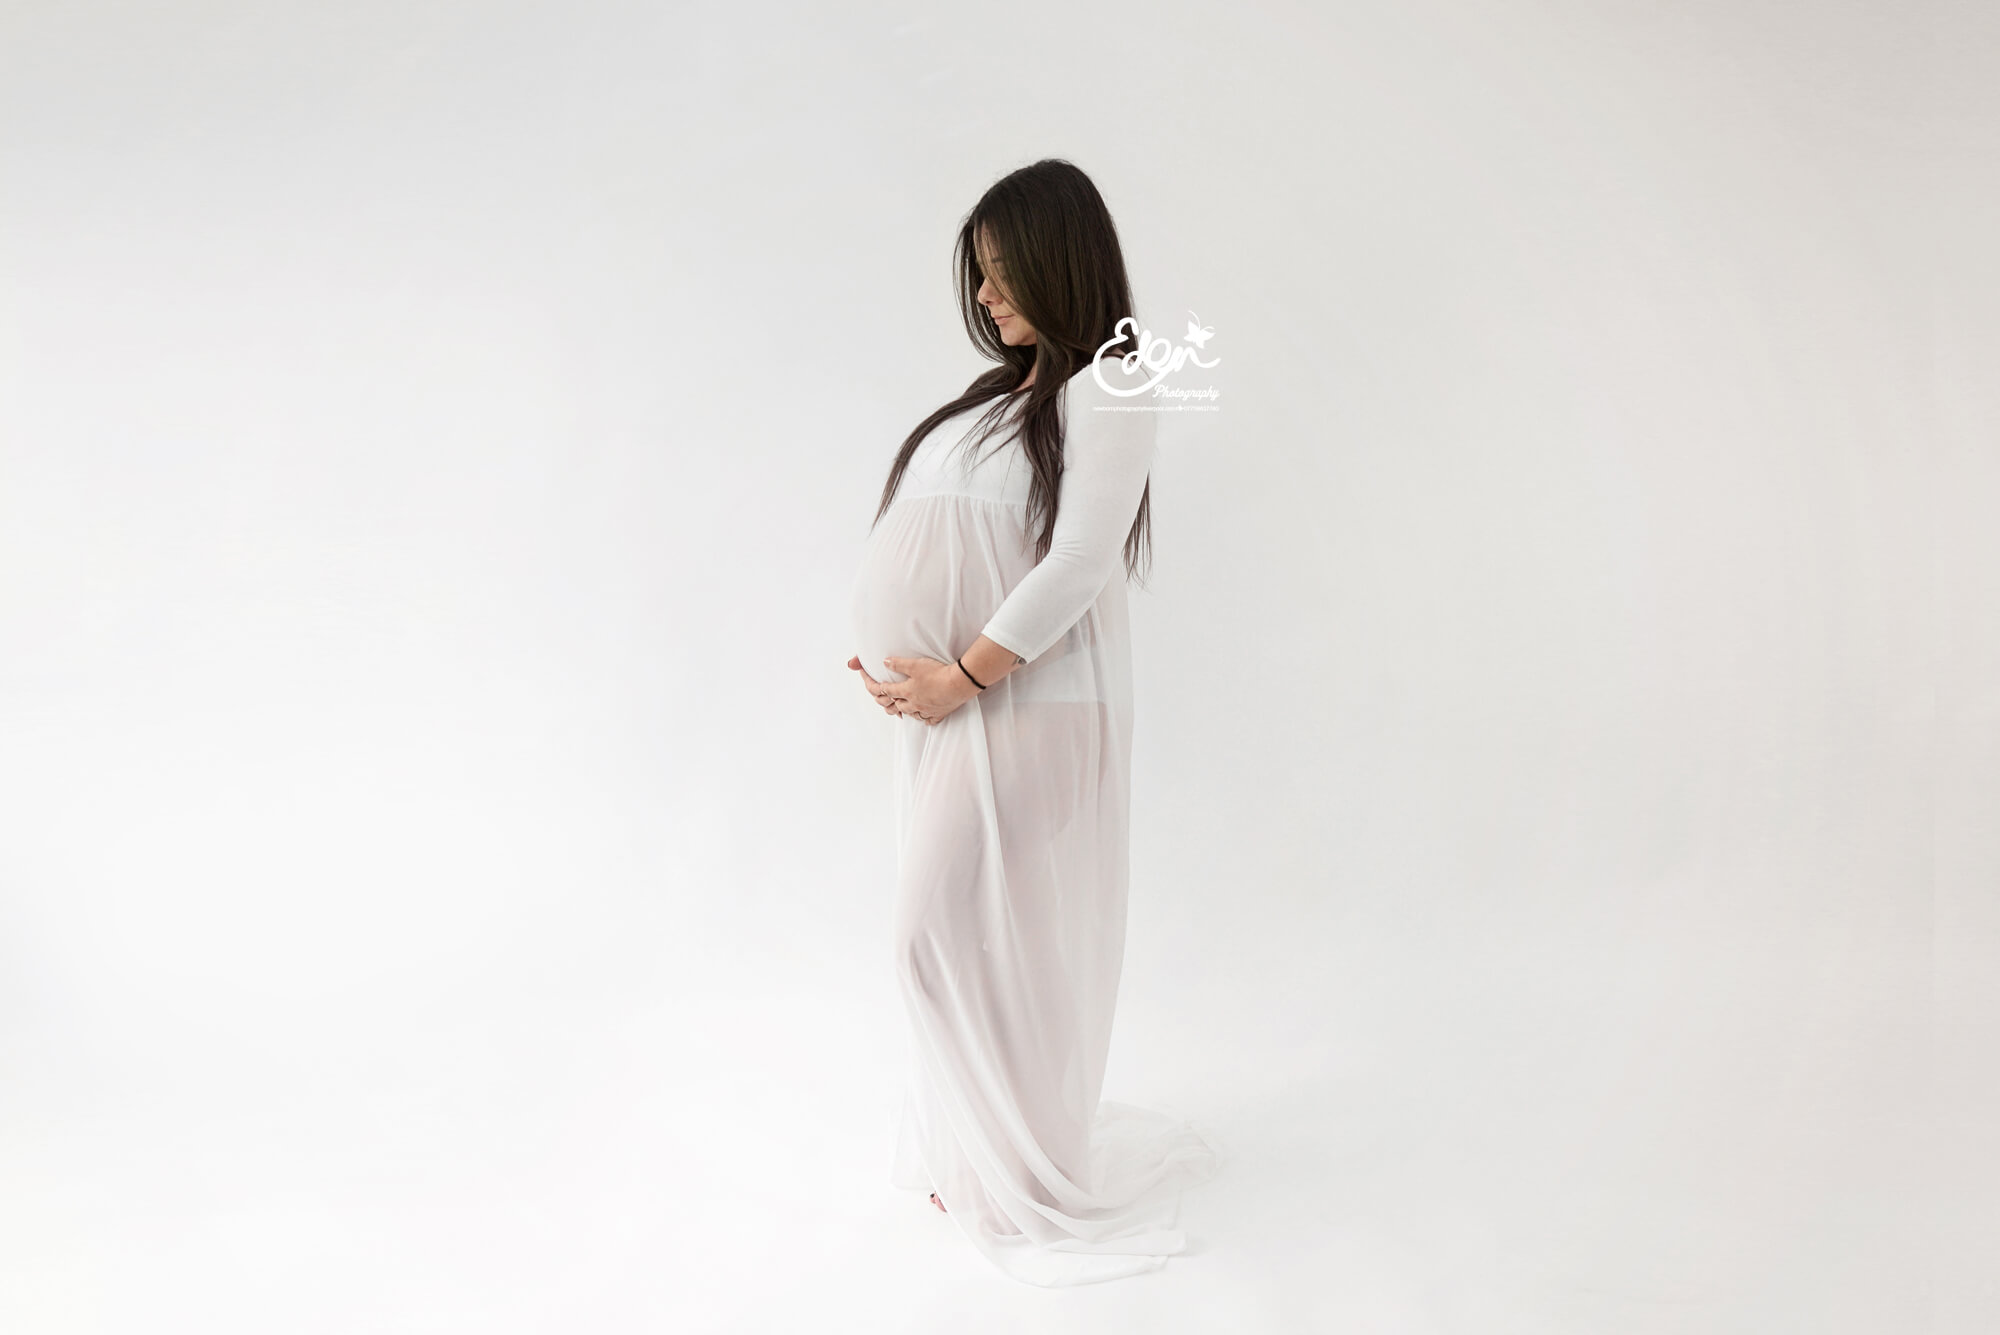 Pregnant lady looking down at her belly in her hands wearing a white flowing dress